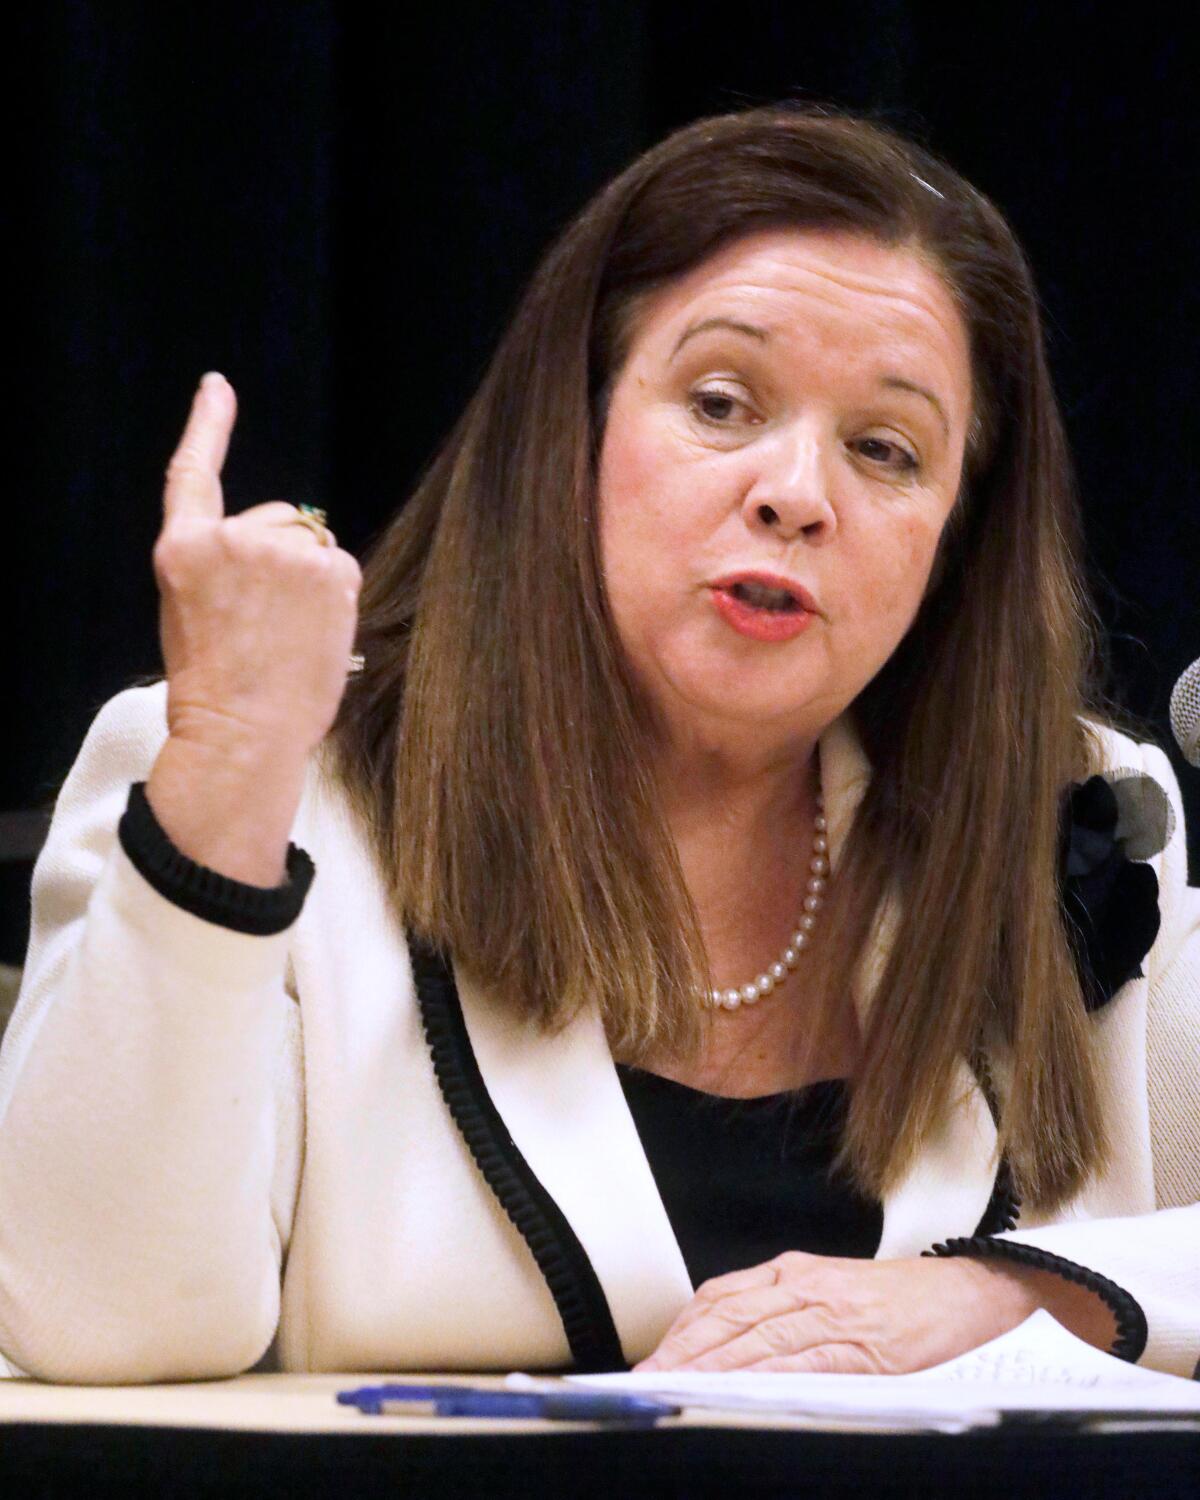 A vertical frame of a woman with medium-length brown hair in a white suit seated, gesturing with right hand while speaking